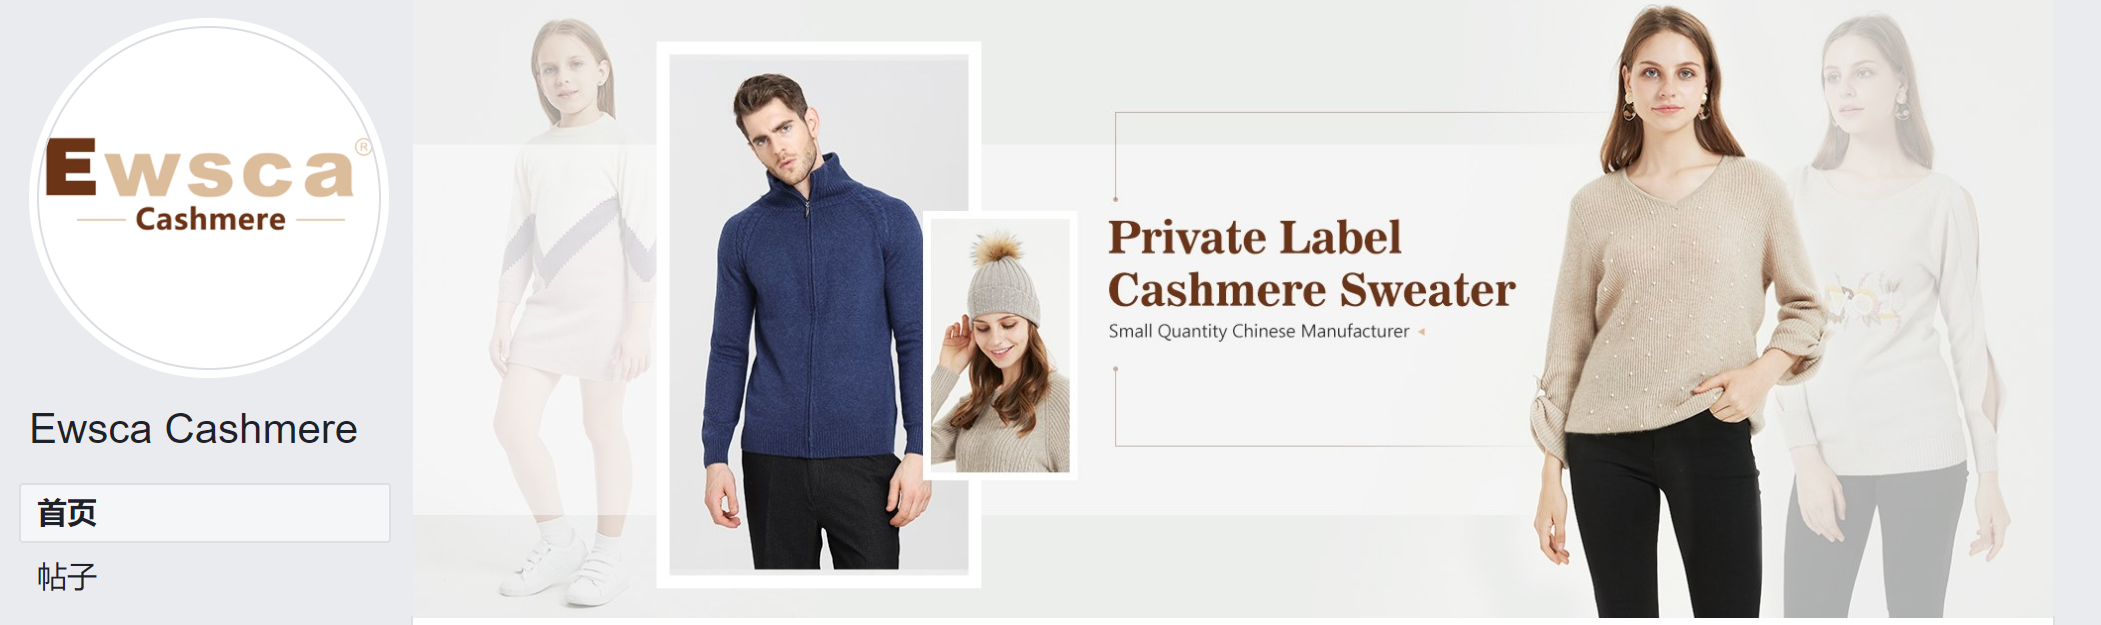 Come and follow us on Ewsca Cashmere FaceBook